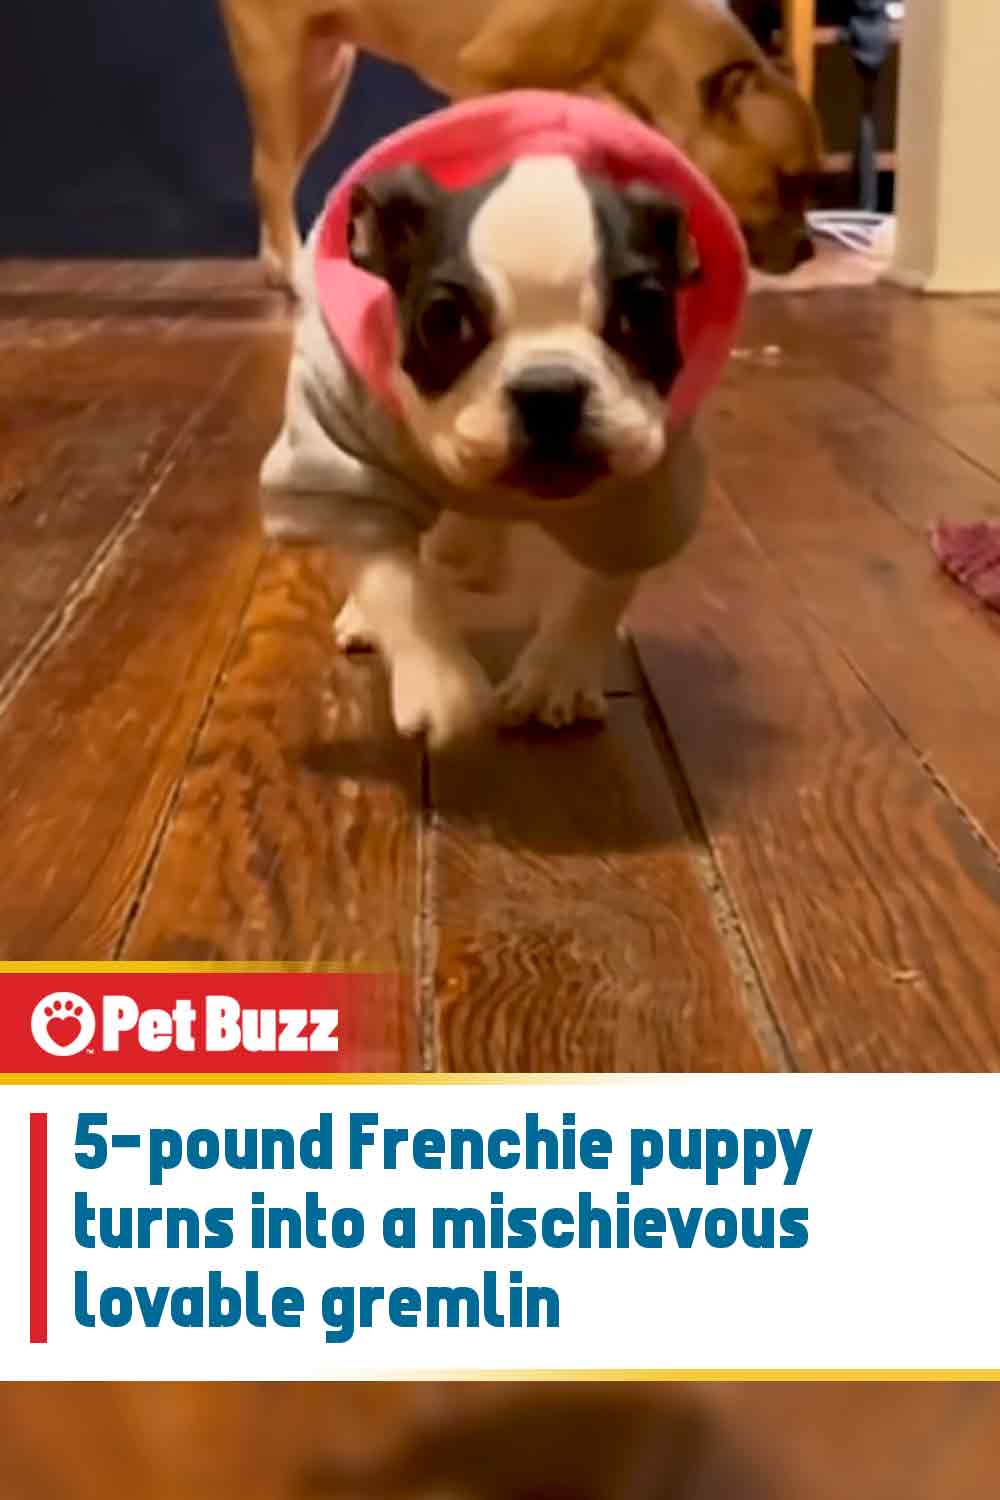 5-pound Frenchie puppy turns into a mischievous lovable gremlin